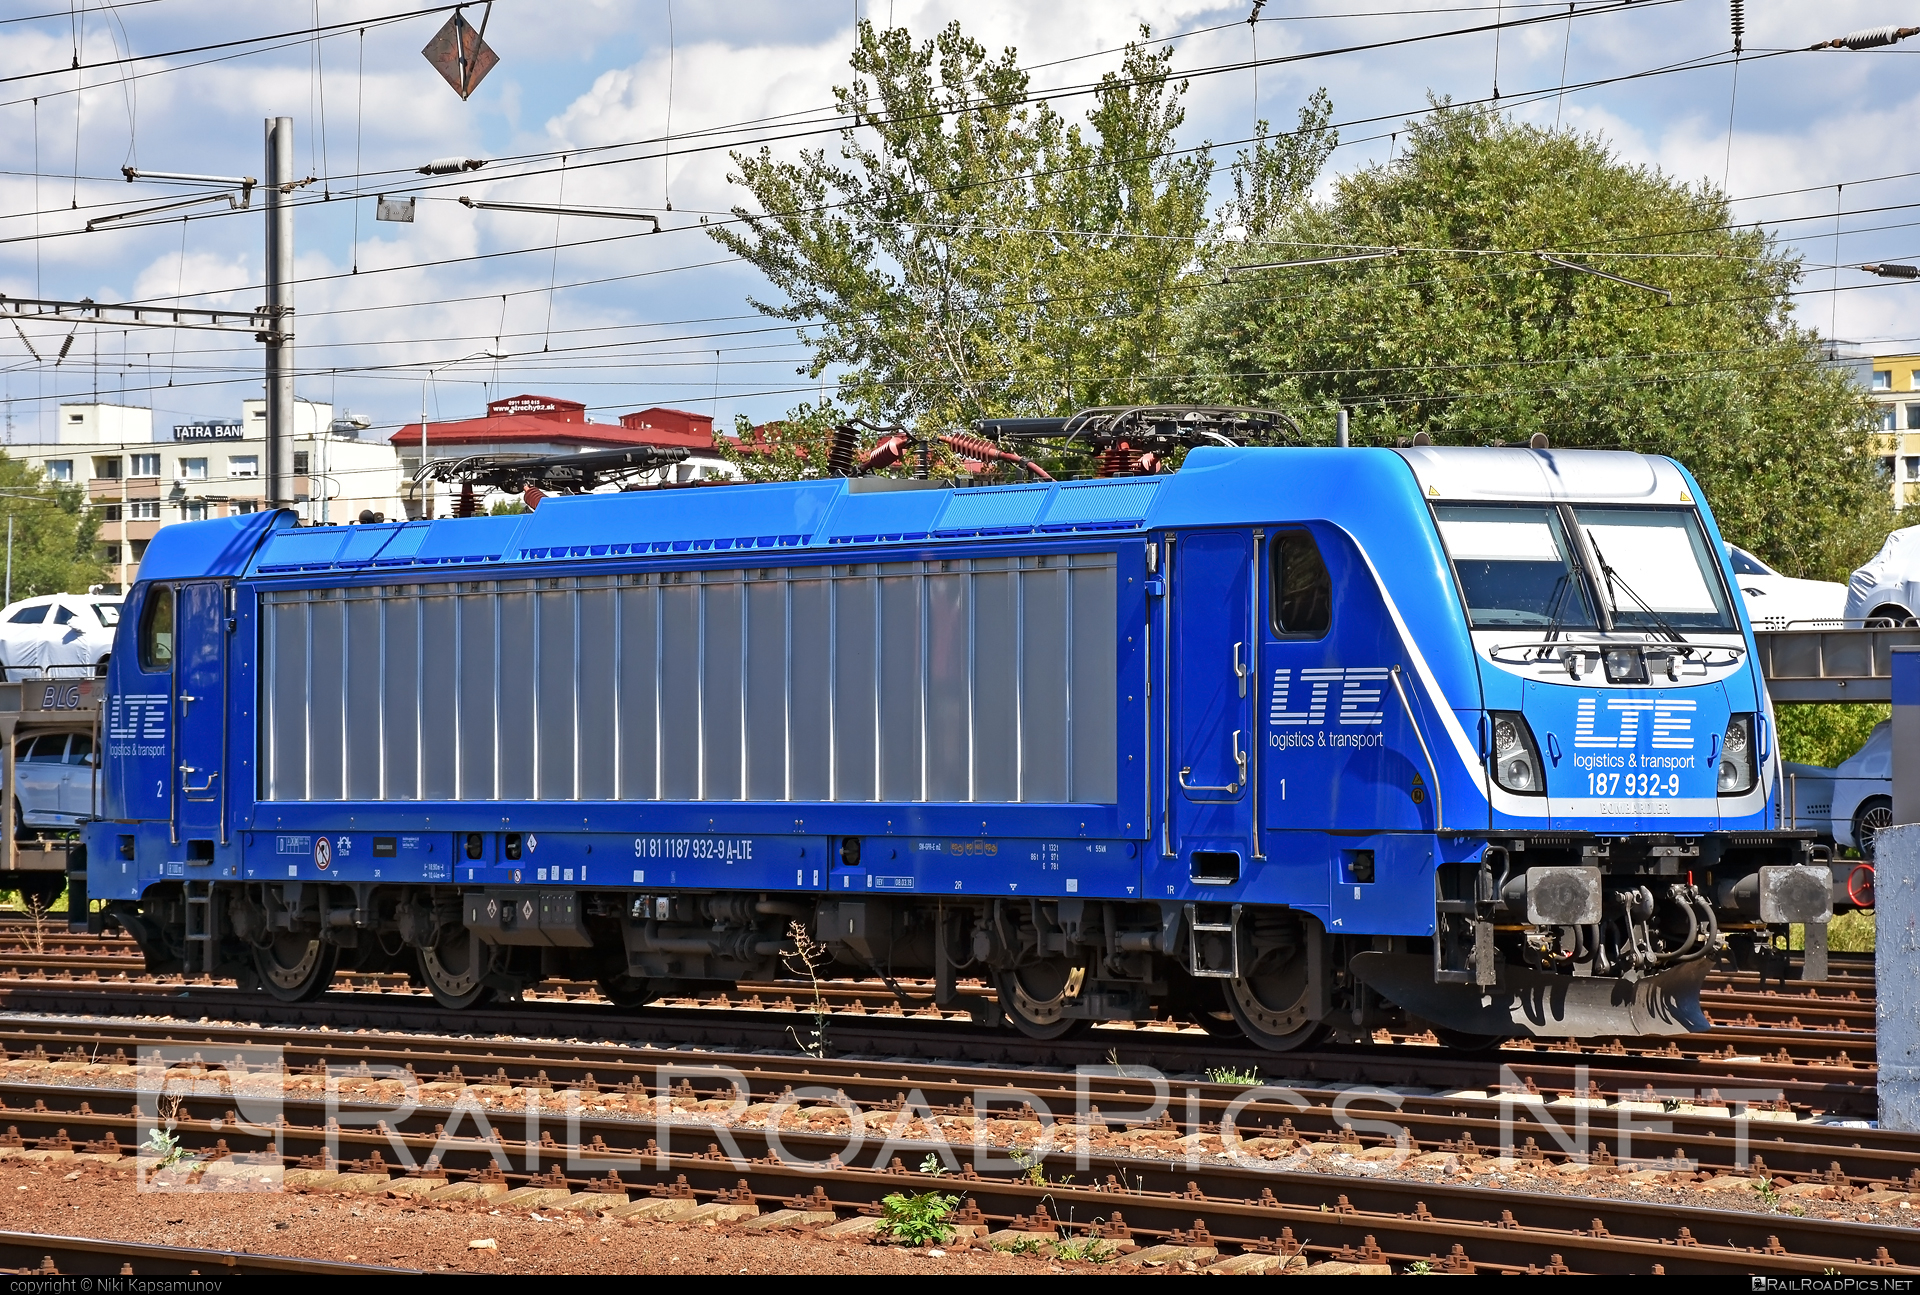 Bombardier TRAXX F160 AC3 - 187 932-9 operated by LTE Logistik und Transport GmbH #bombardier #bombardiertraxx #lte #ltelogistikundtransport #ltelogistikundtransportgmbh #traxx #traxxf160 #traxxf160ac #traxxf160ac3